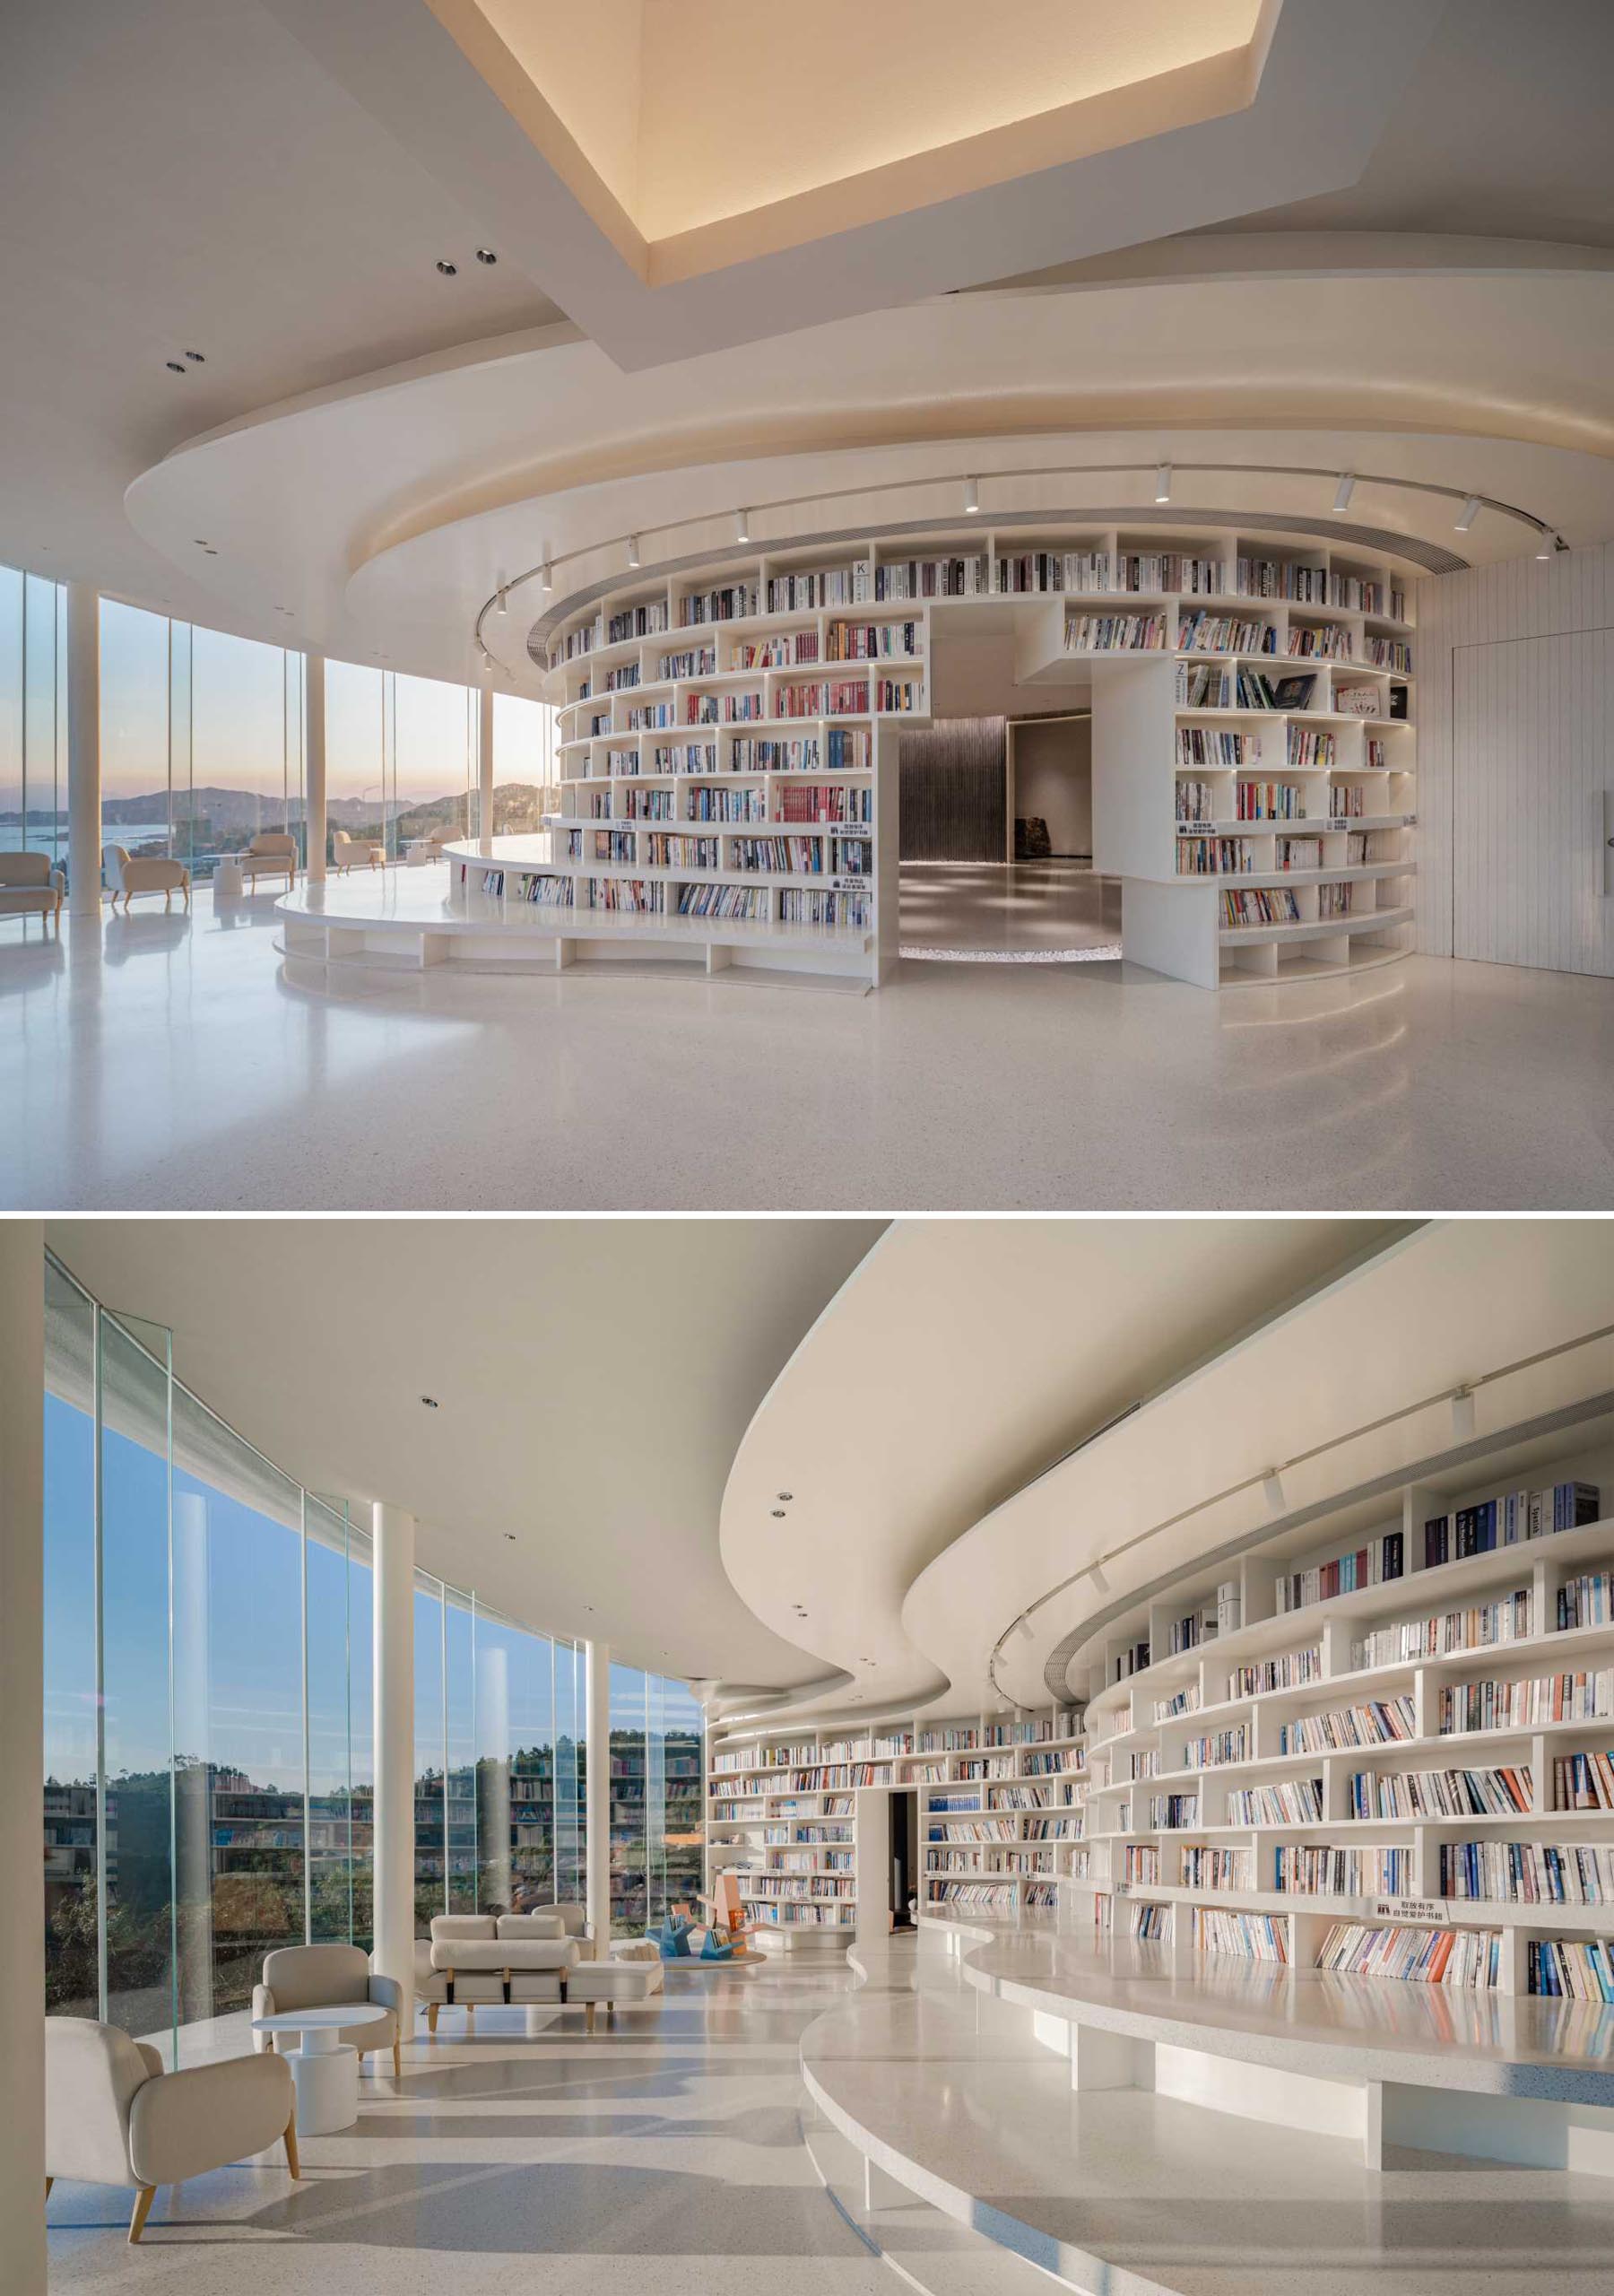 Upon entering this library, guests are welcomed into the reading space, that has a bookshelf that wraps around exterior wall of a dark room, and follows the curves of the building.